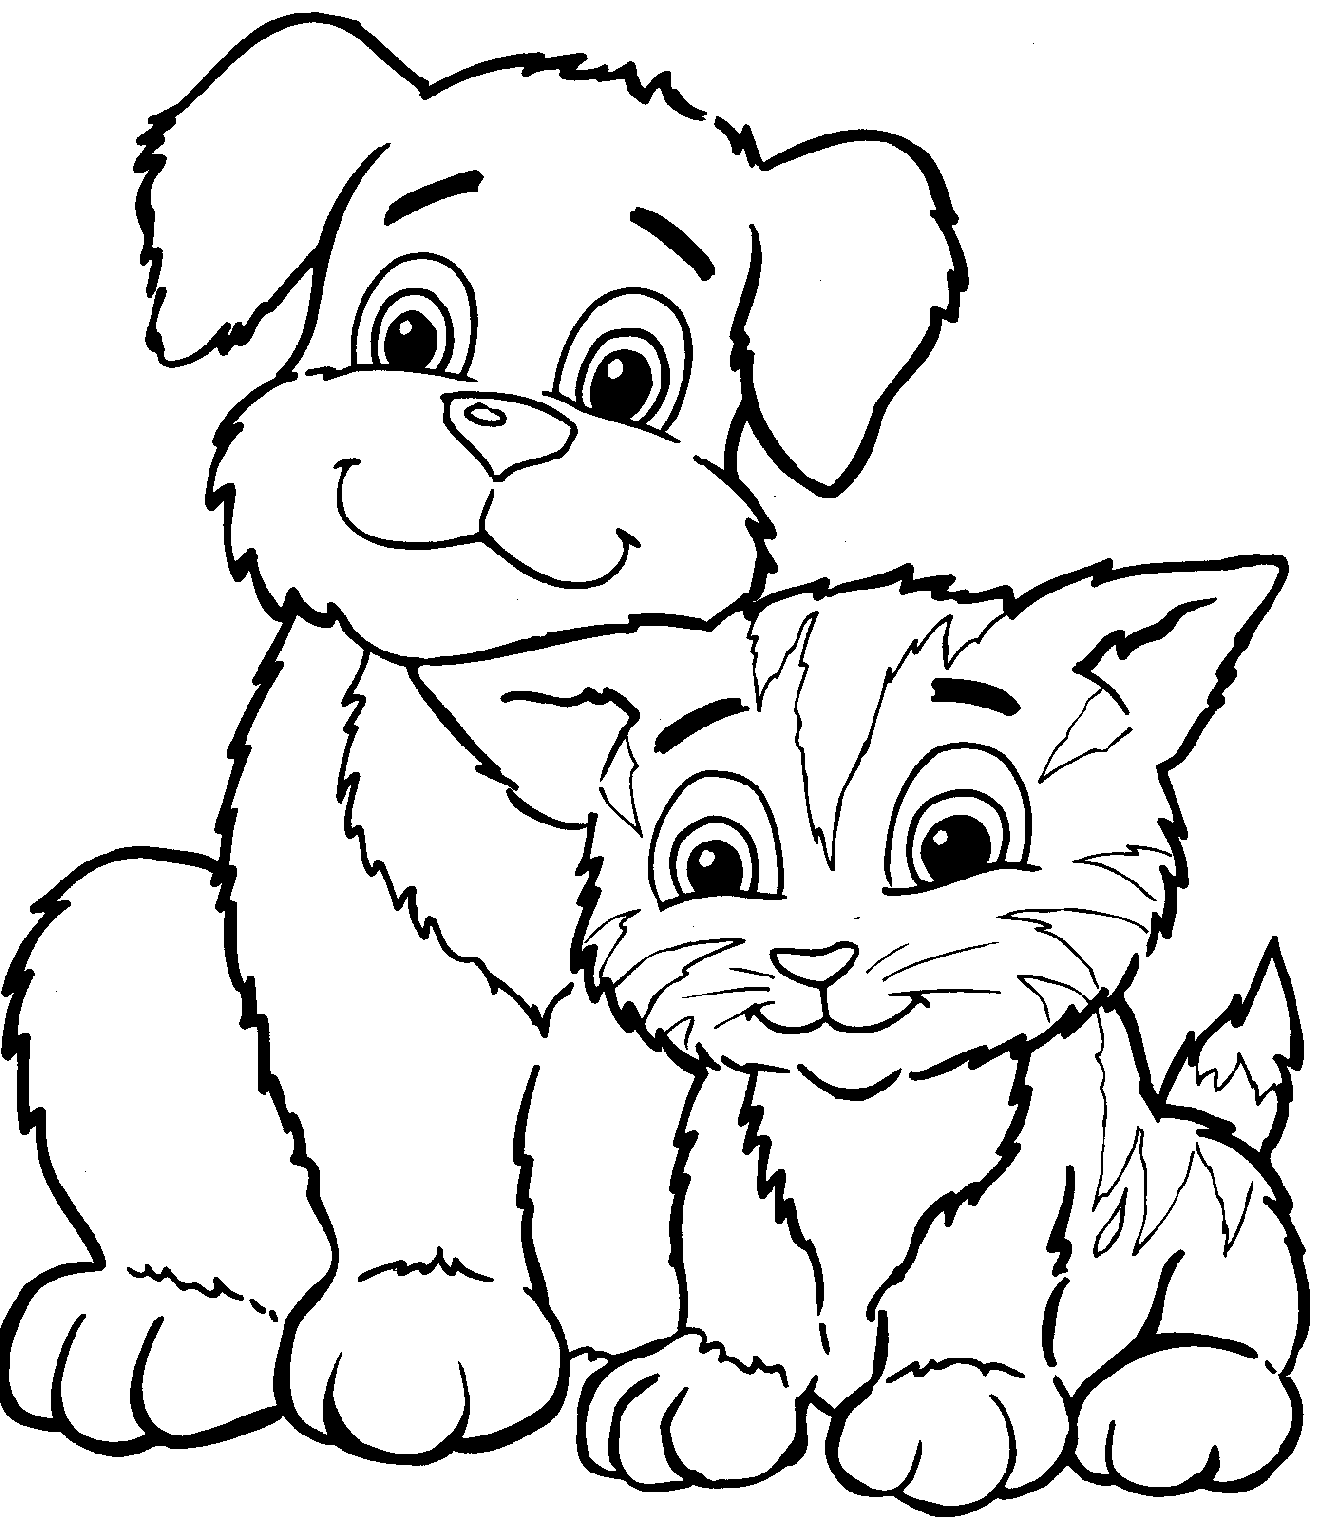 Puppies And Kittens Colouring Pages Puppy And Kitten.